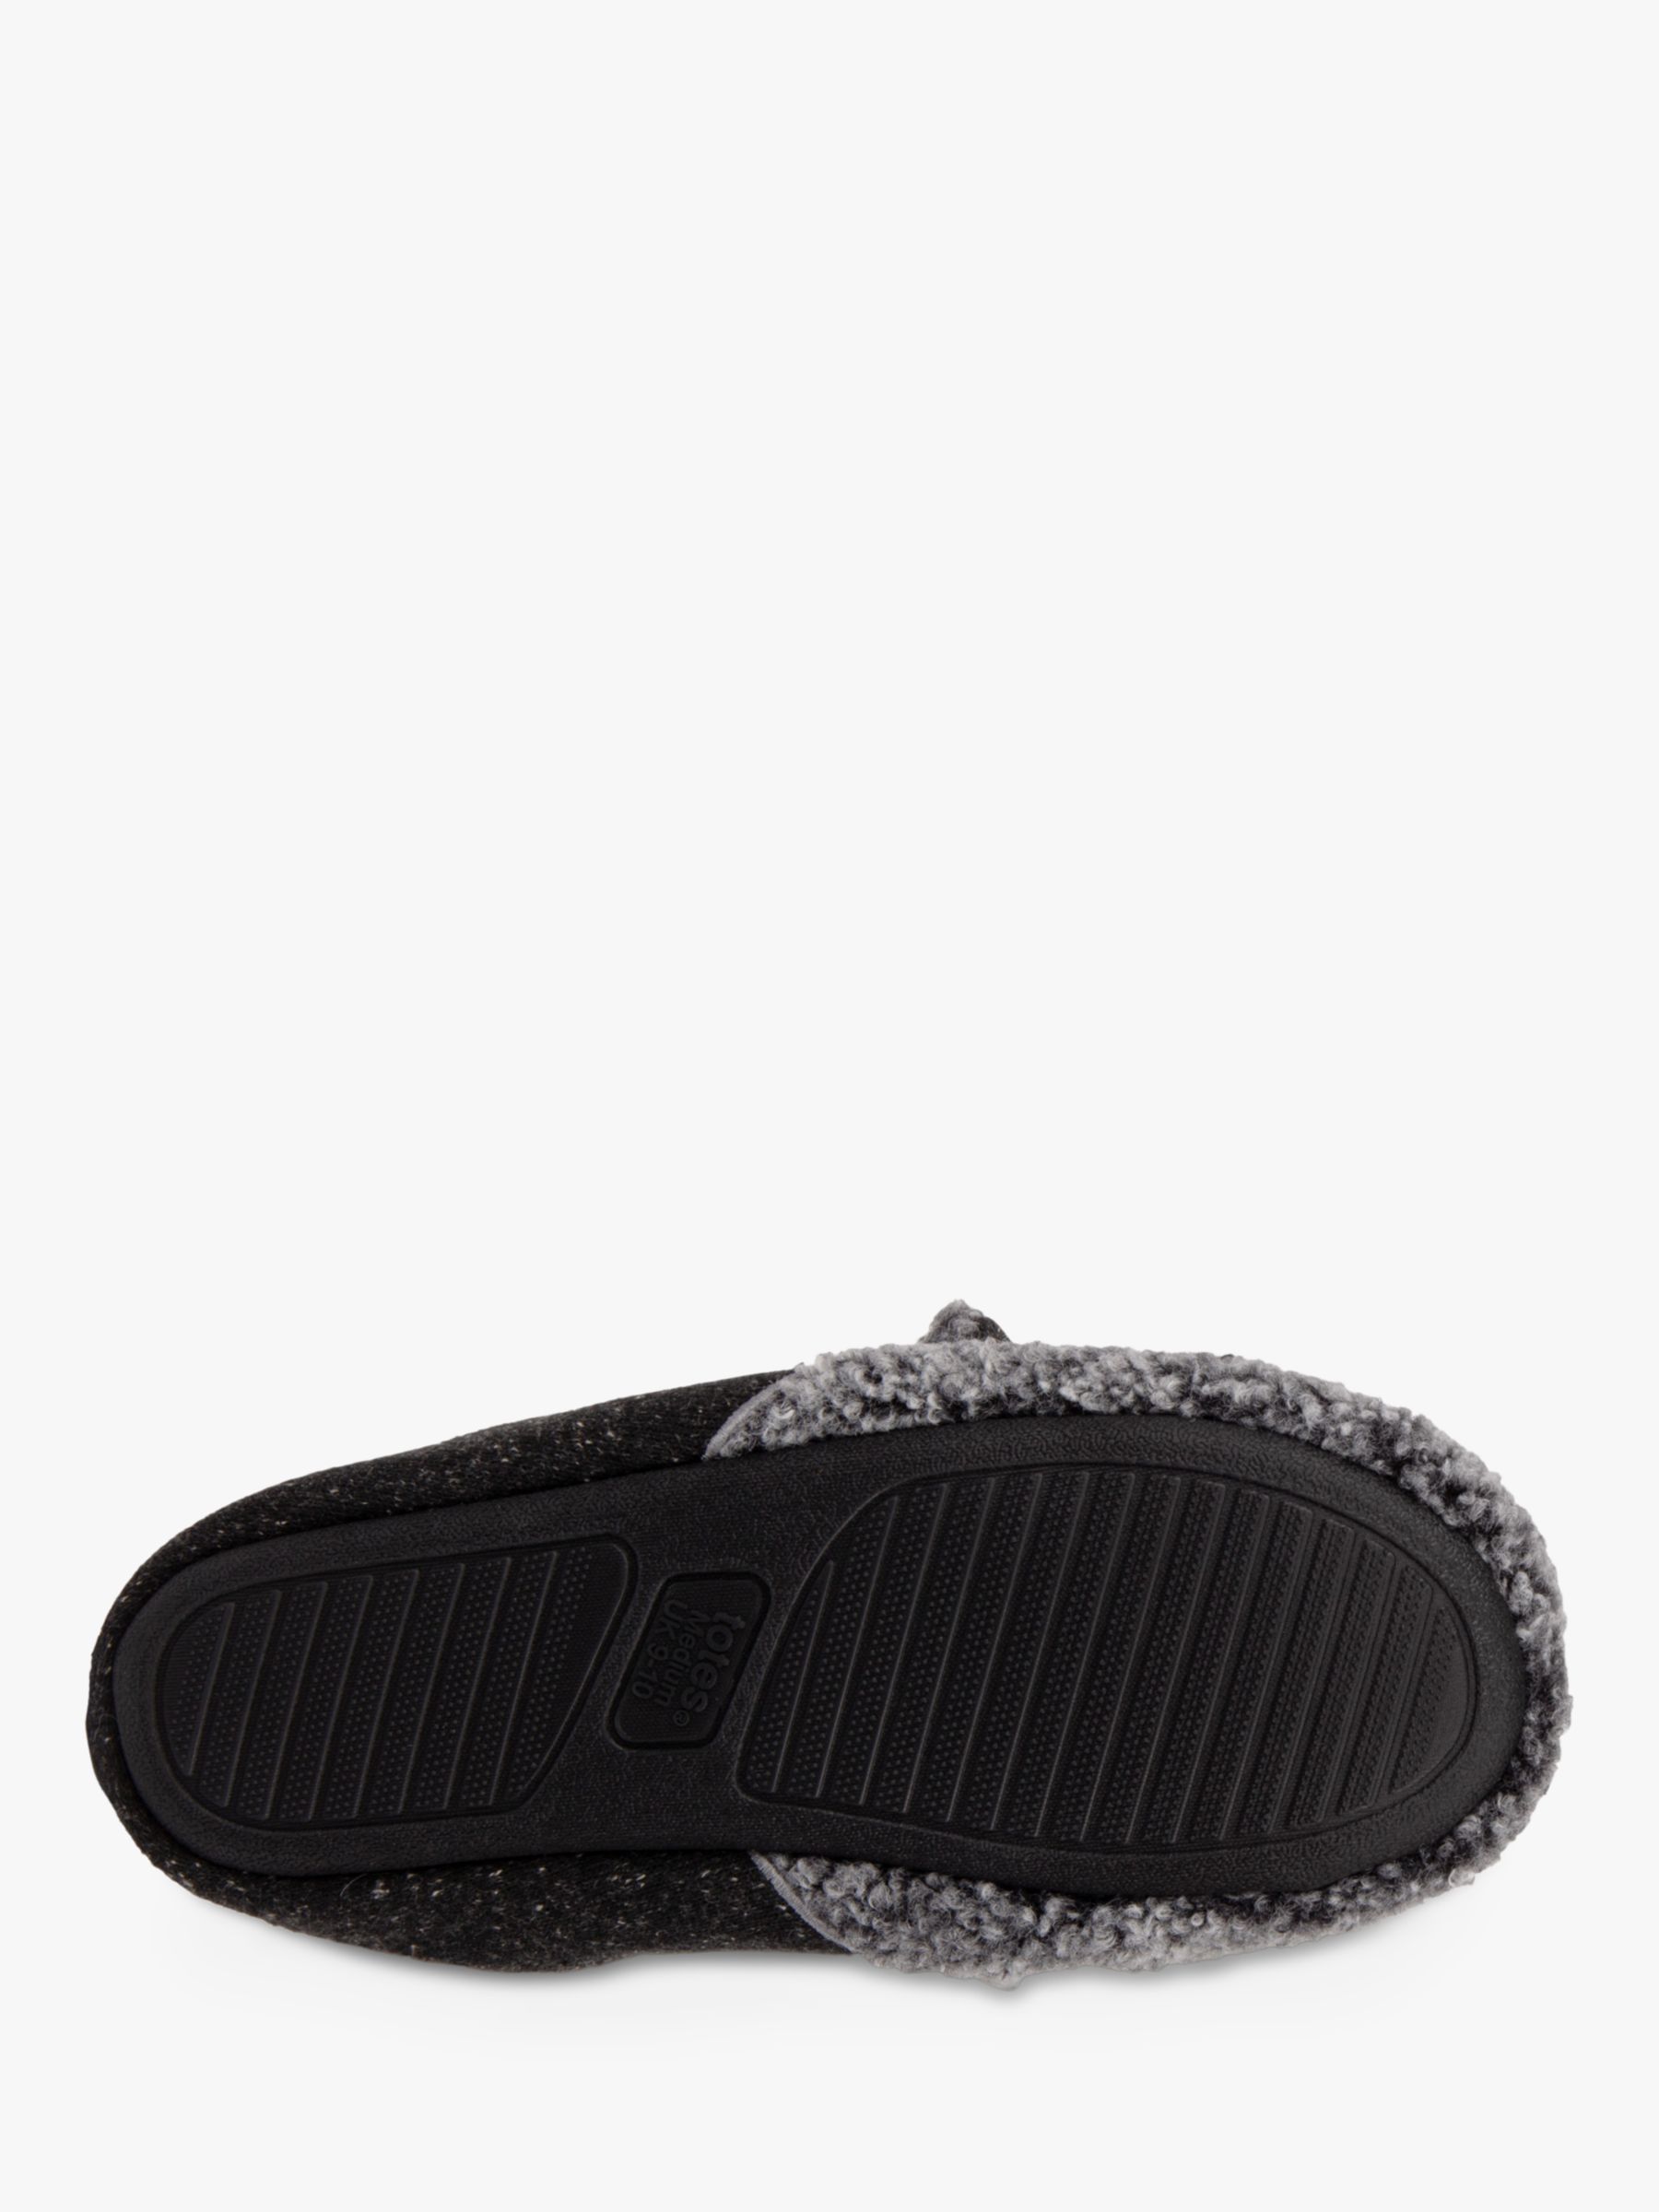 totes Mouse Mule Slippers, Black/Grey, S